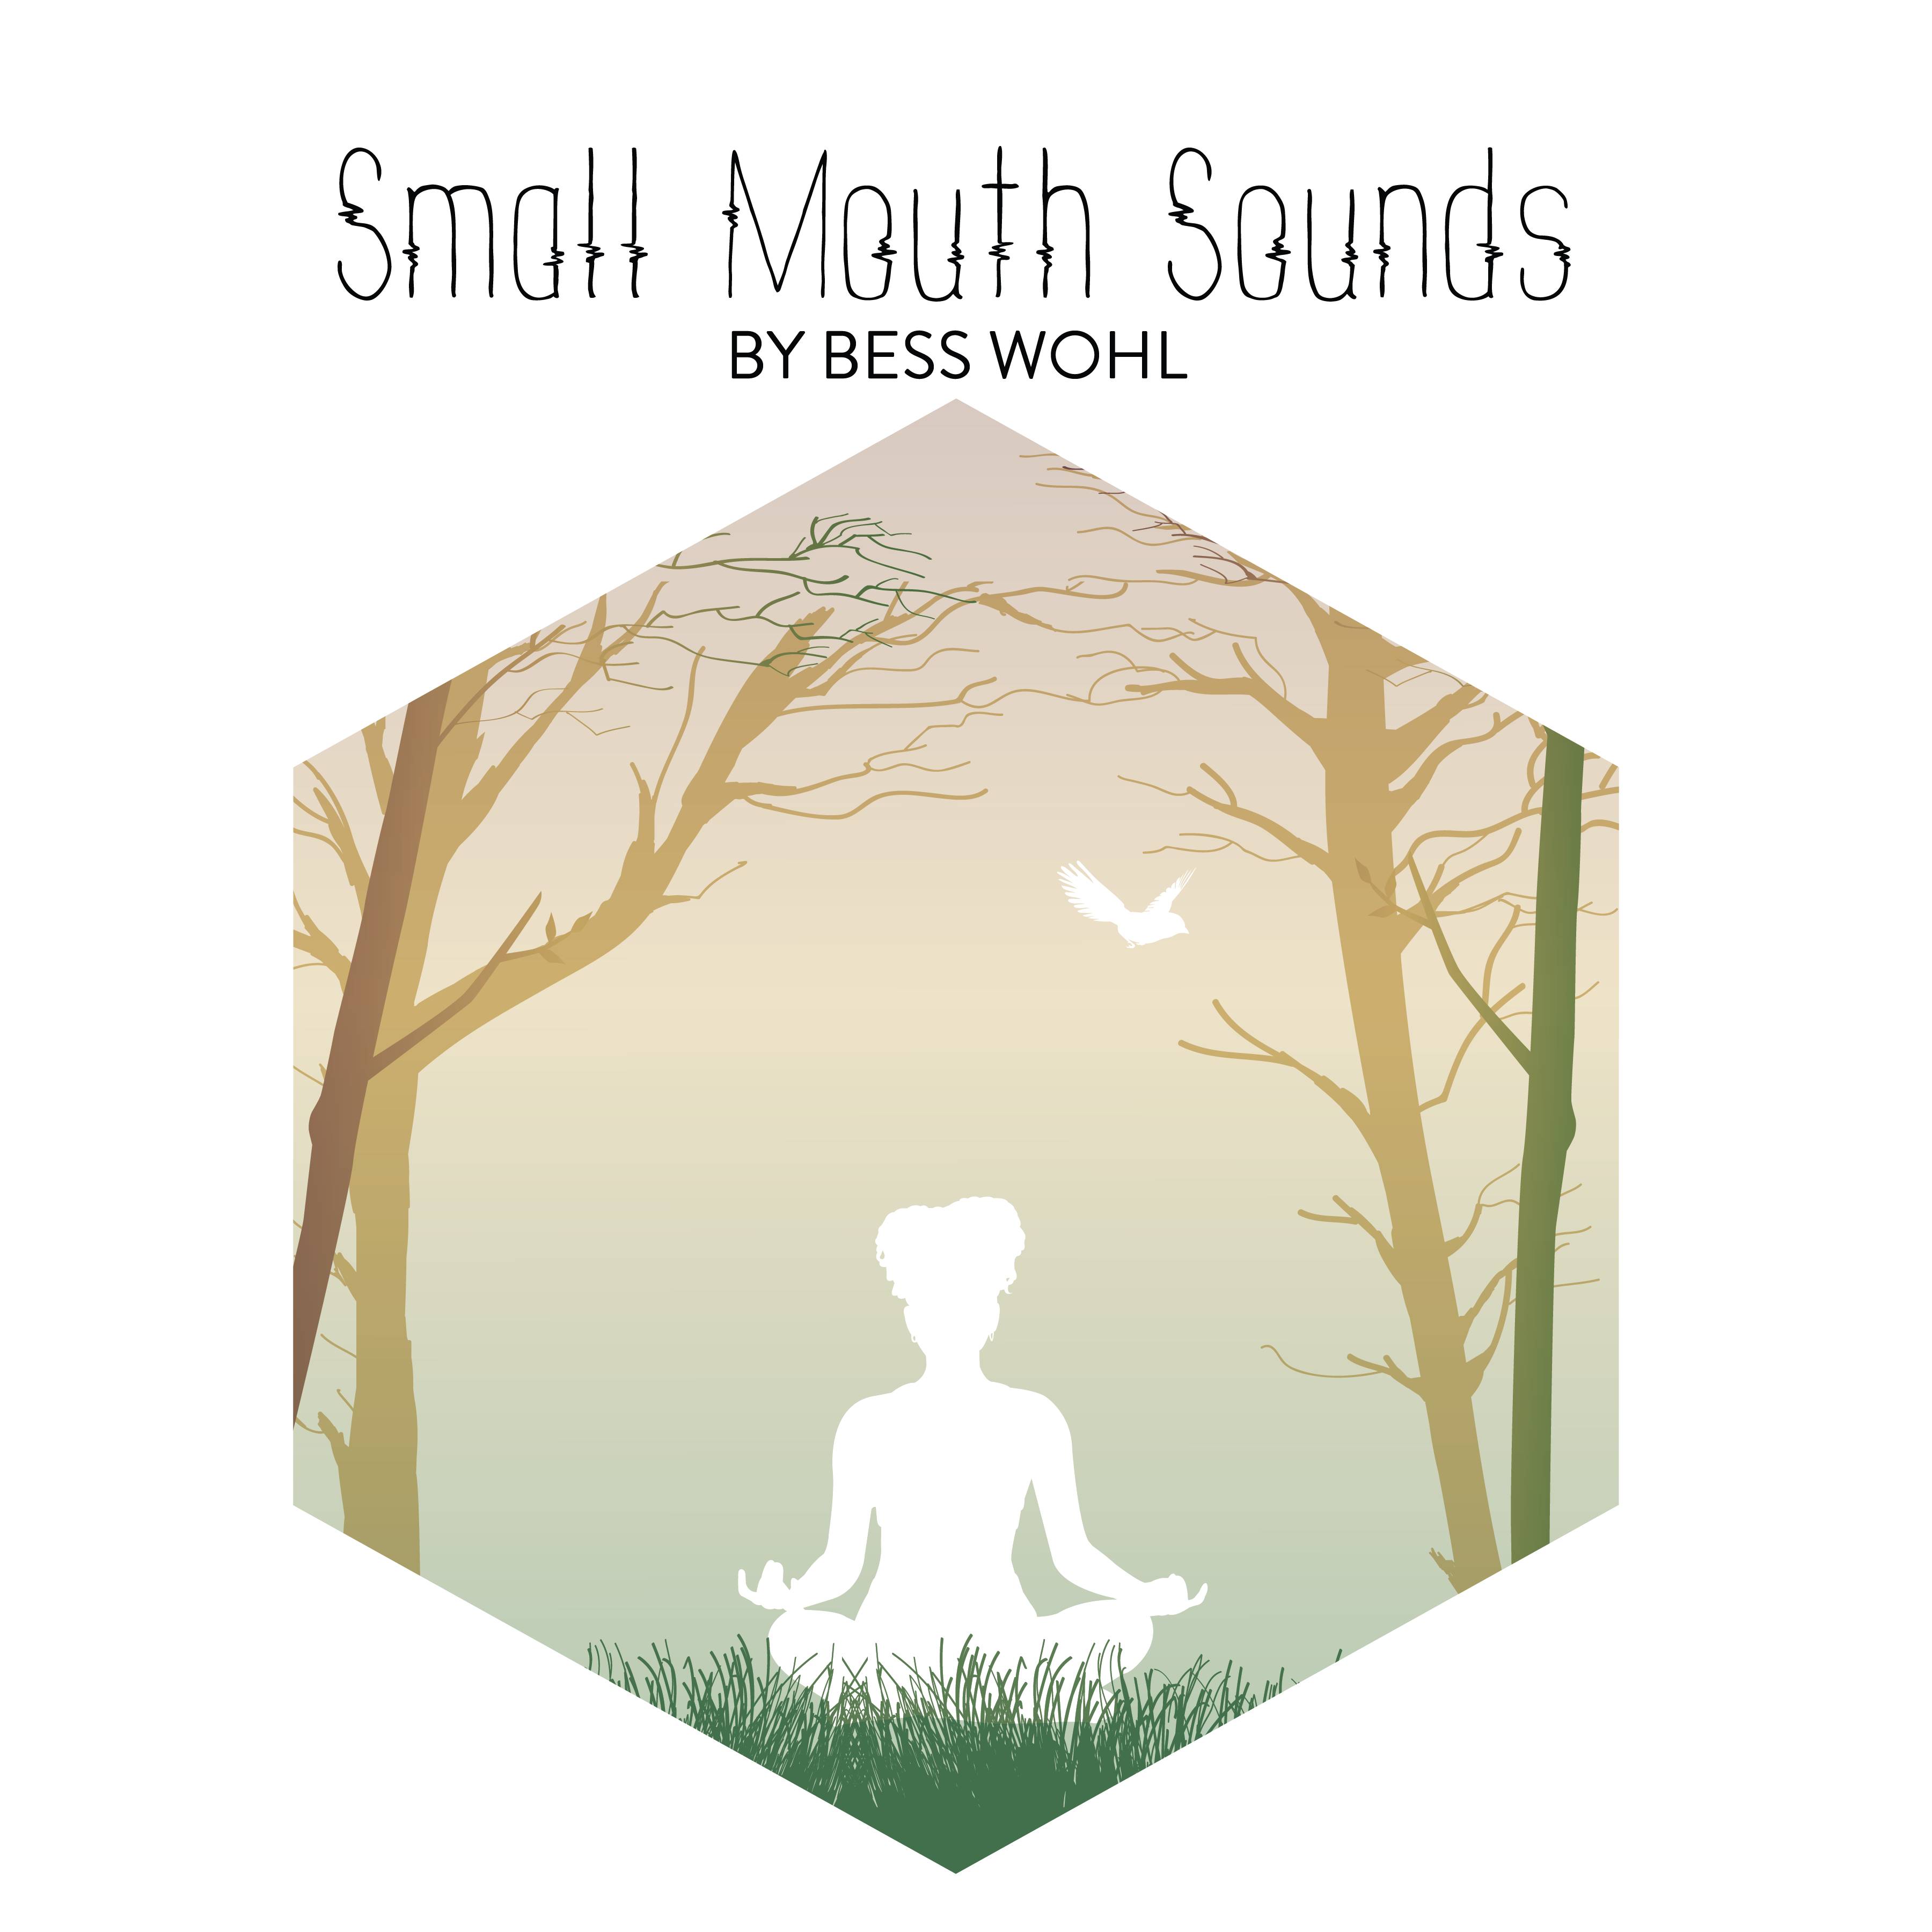 Small Mouth Sounds Poster